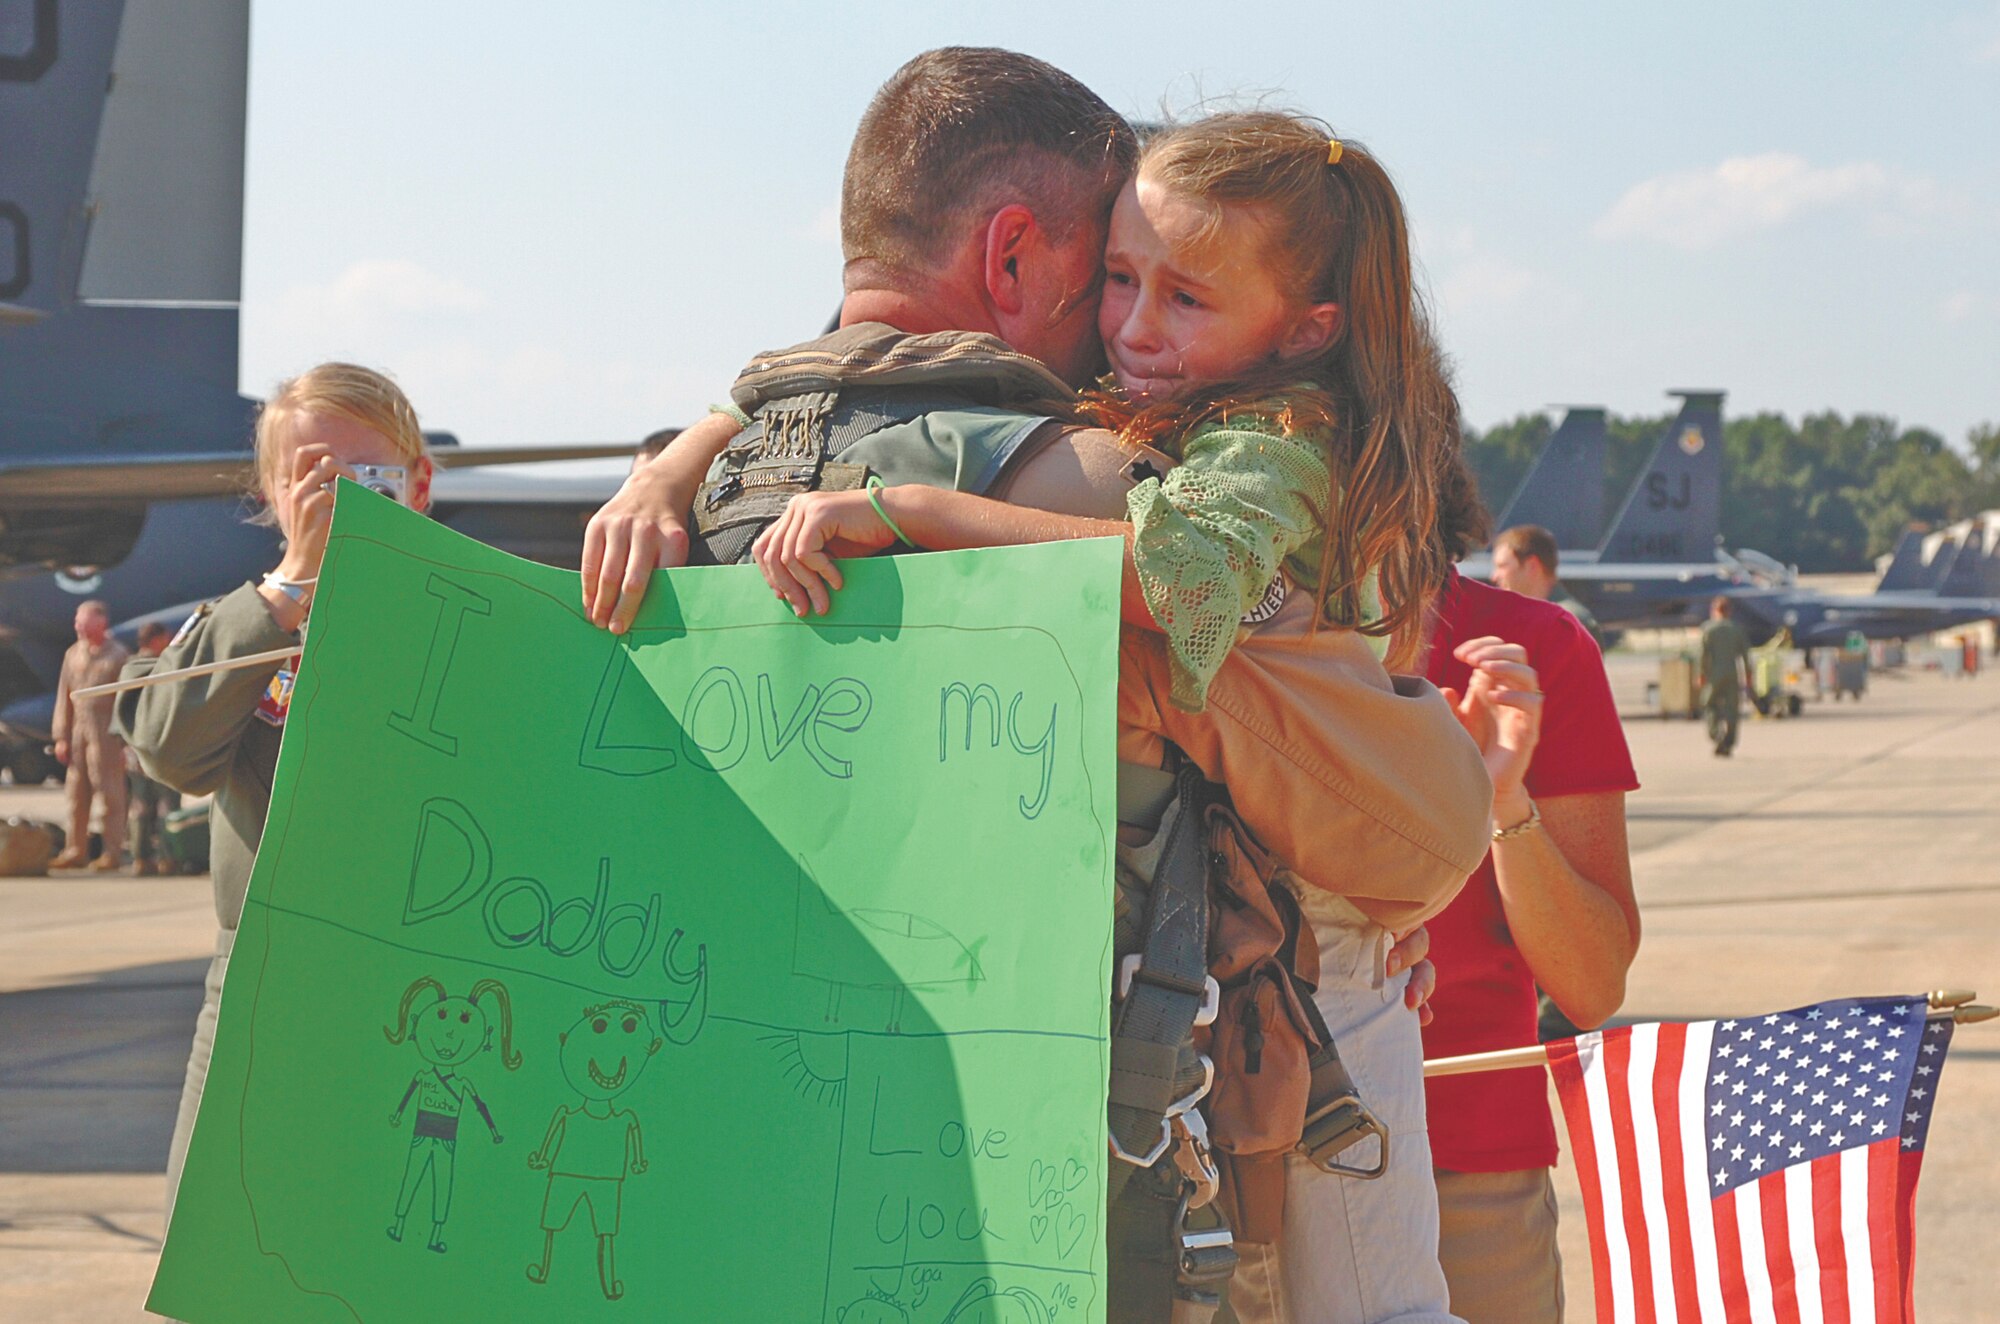 Lieutenant Col. Todd Boyd, 335th Fighter Squadron commander, embraces his daughter, Madison, during the first wave of returns of the deployed Chiefs Wednesday afternoon. Several family, squadron and community members welcomed the Chiefs with waving flags.  The Chiefs return home after serving more than four months in Southwest Asia in support of Operation Iraqi Freedom. Our Airmen are expeditionary warriors who are trained and ready to deploy in support of the mission. The Chiefs proved the F-15E Strike Eagle continues to provide matchless combat power anytime, anywhere. (Photo by Senior Airman Micky Bazaldua)